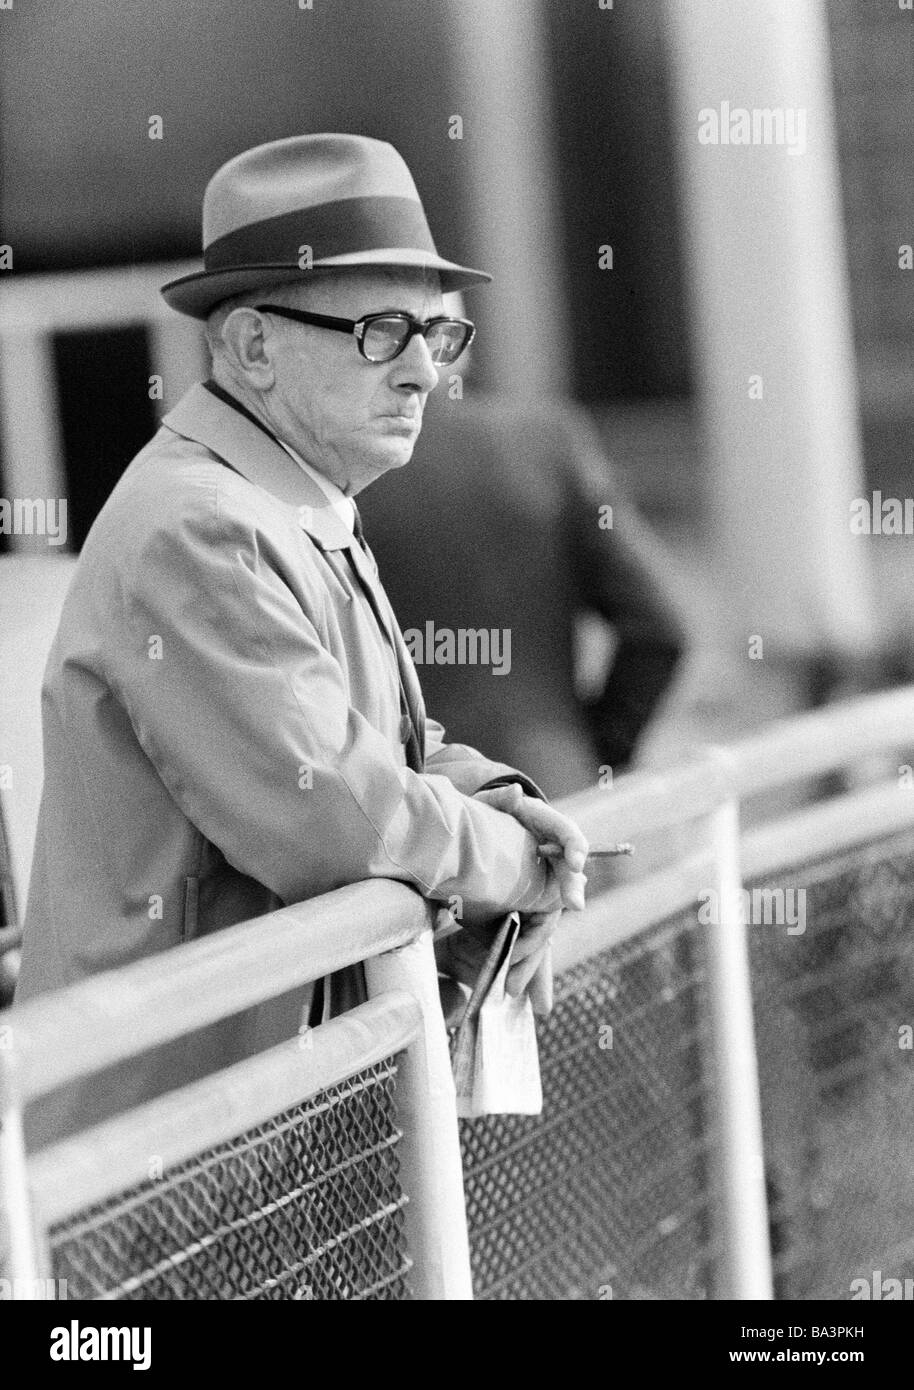 Seventies, black and white photo, sports, equestrianism, racecourse Dinslaken, trotting race 1973, horse-racing bet, man holds a racing sheet in his hands and looks critical to the trotters, aged 65 to 75 years, D-Dinslaken, Lower Rhine, Ruhr area, North Rhine-Westphalia Stock Photo